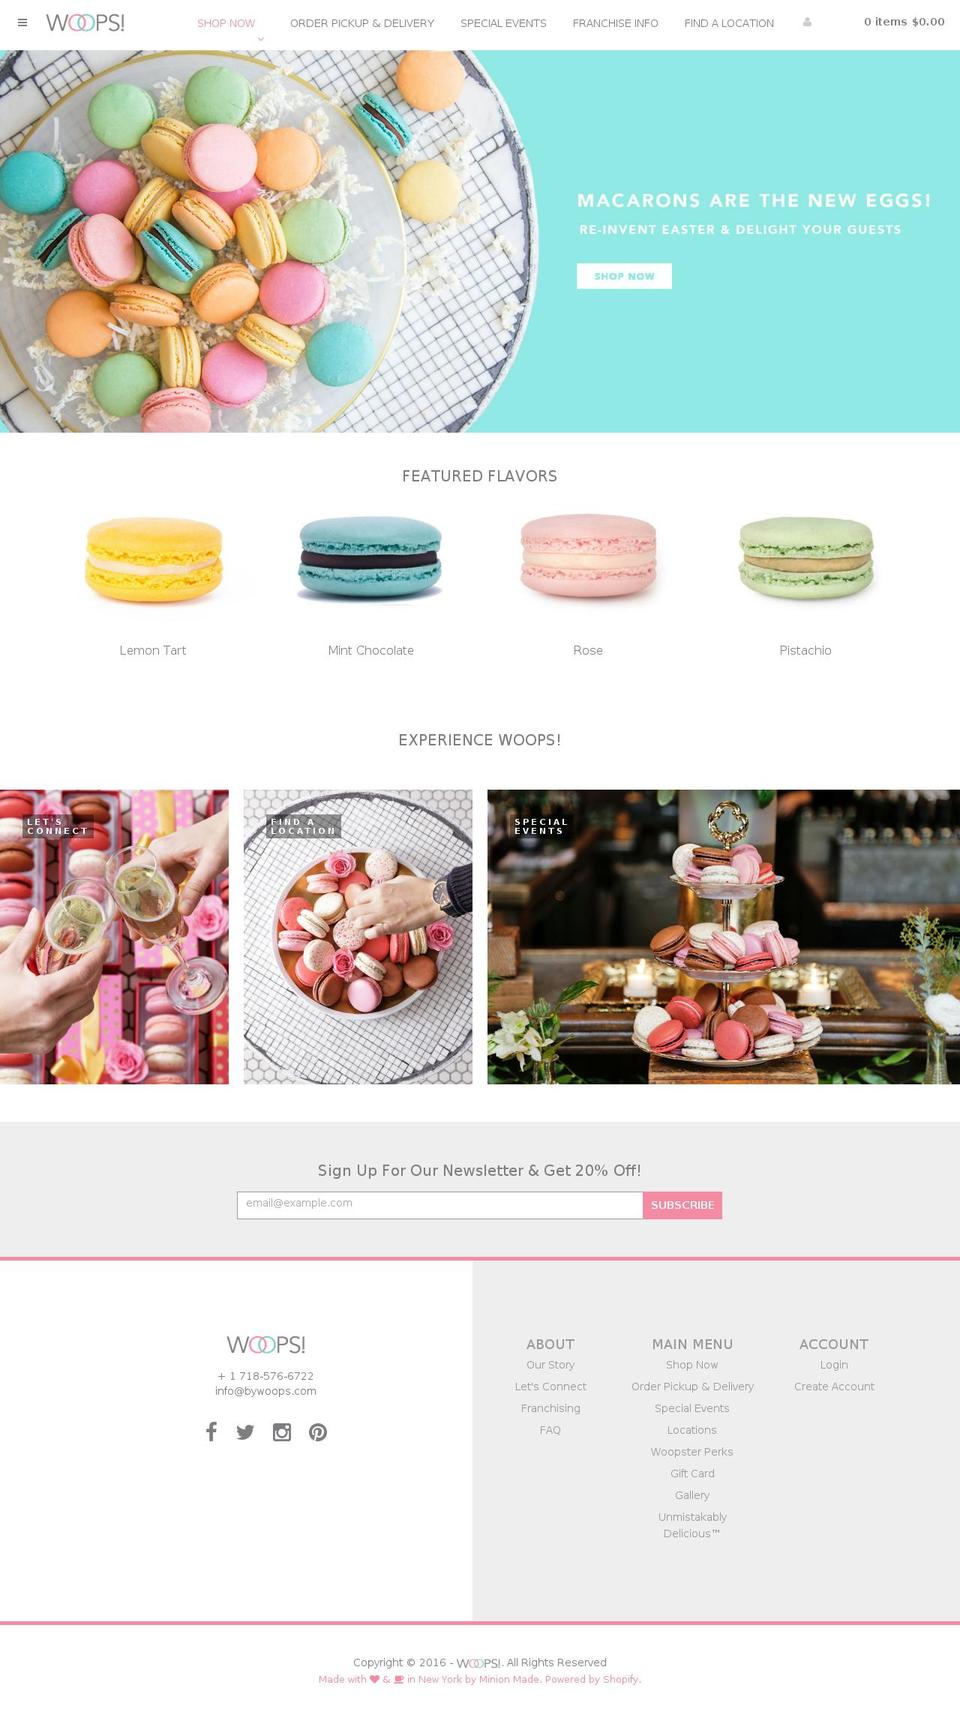 Minion Shopify theme site example macaronsbywoops.com